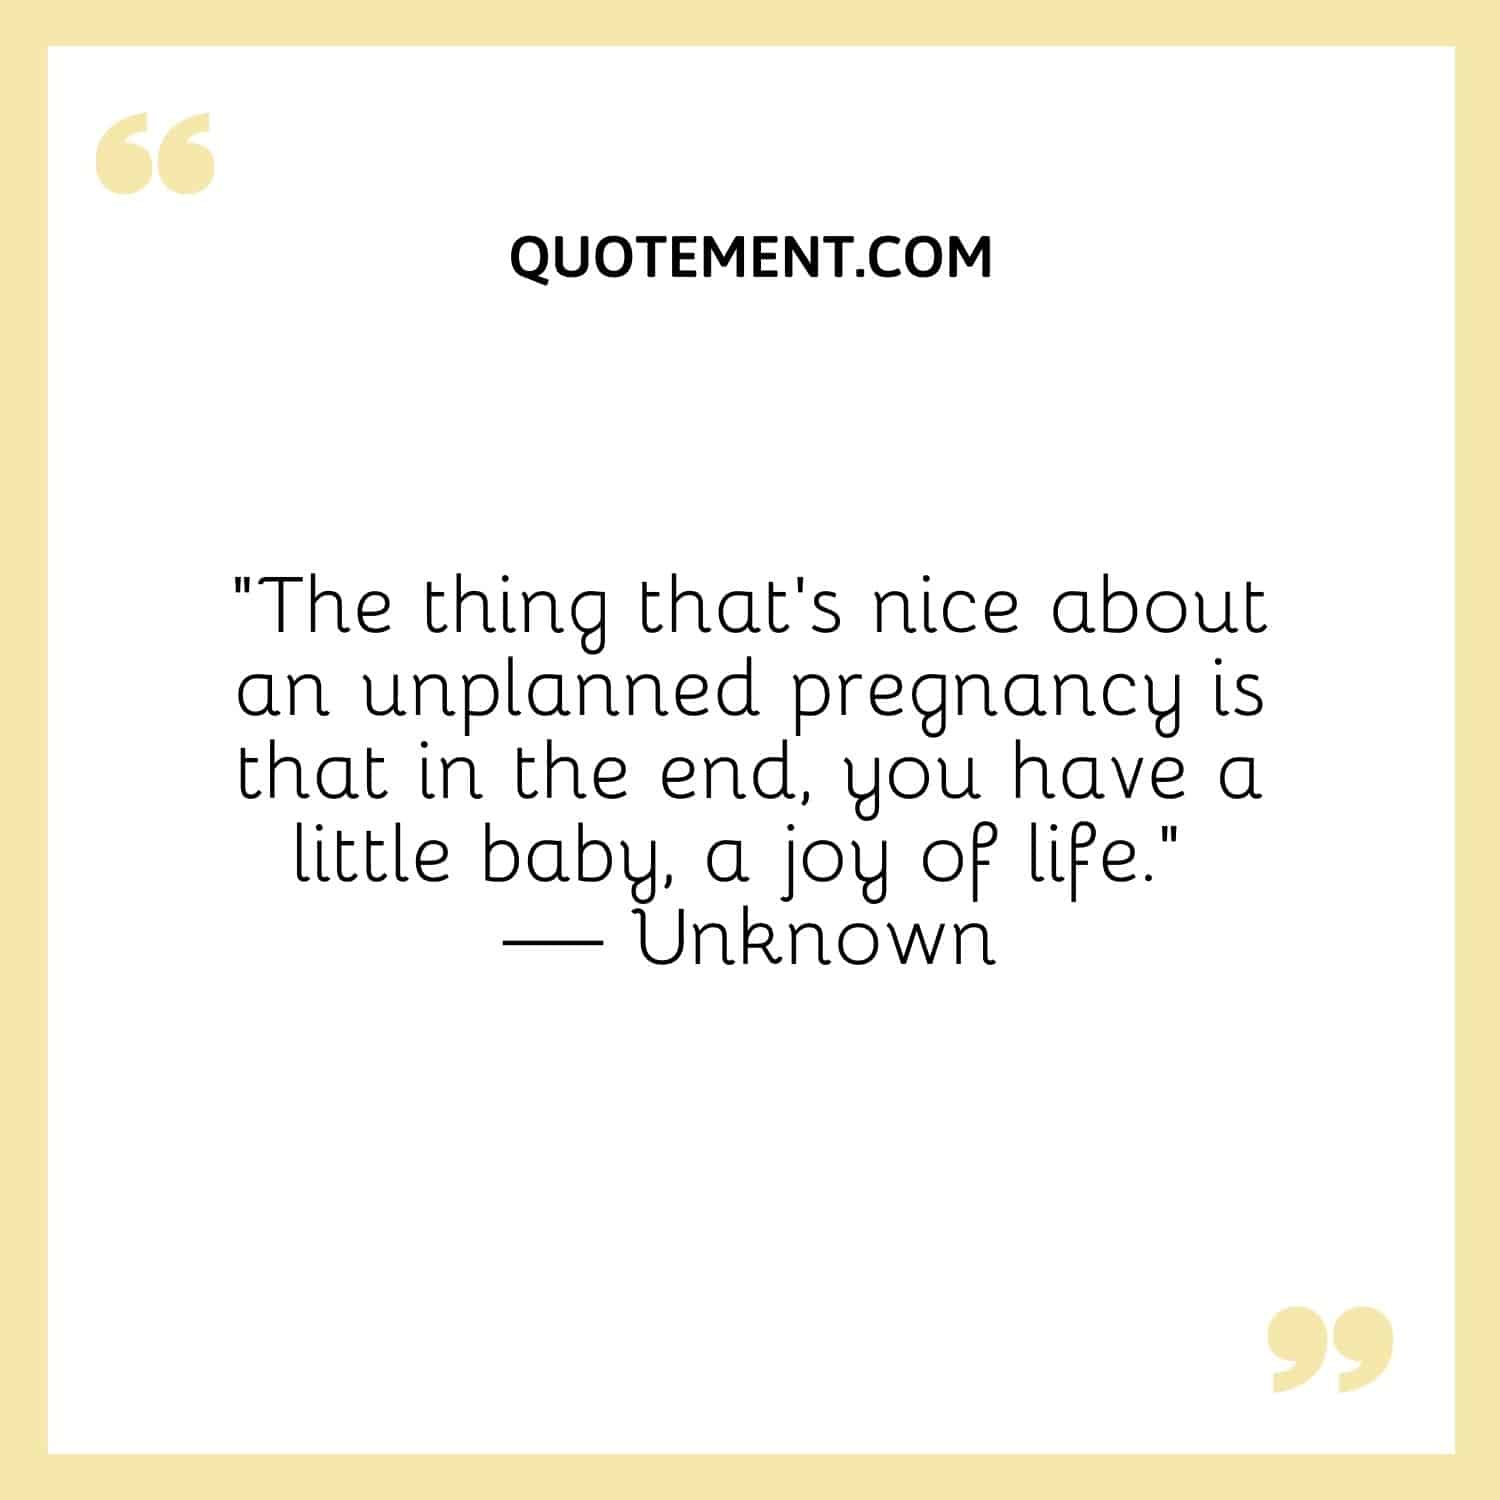 The thing that’s nice about an unplanned pregnancy is that in the end, you have a little baby